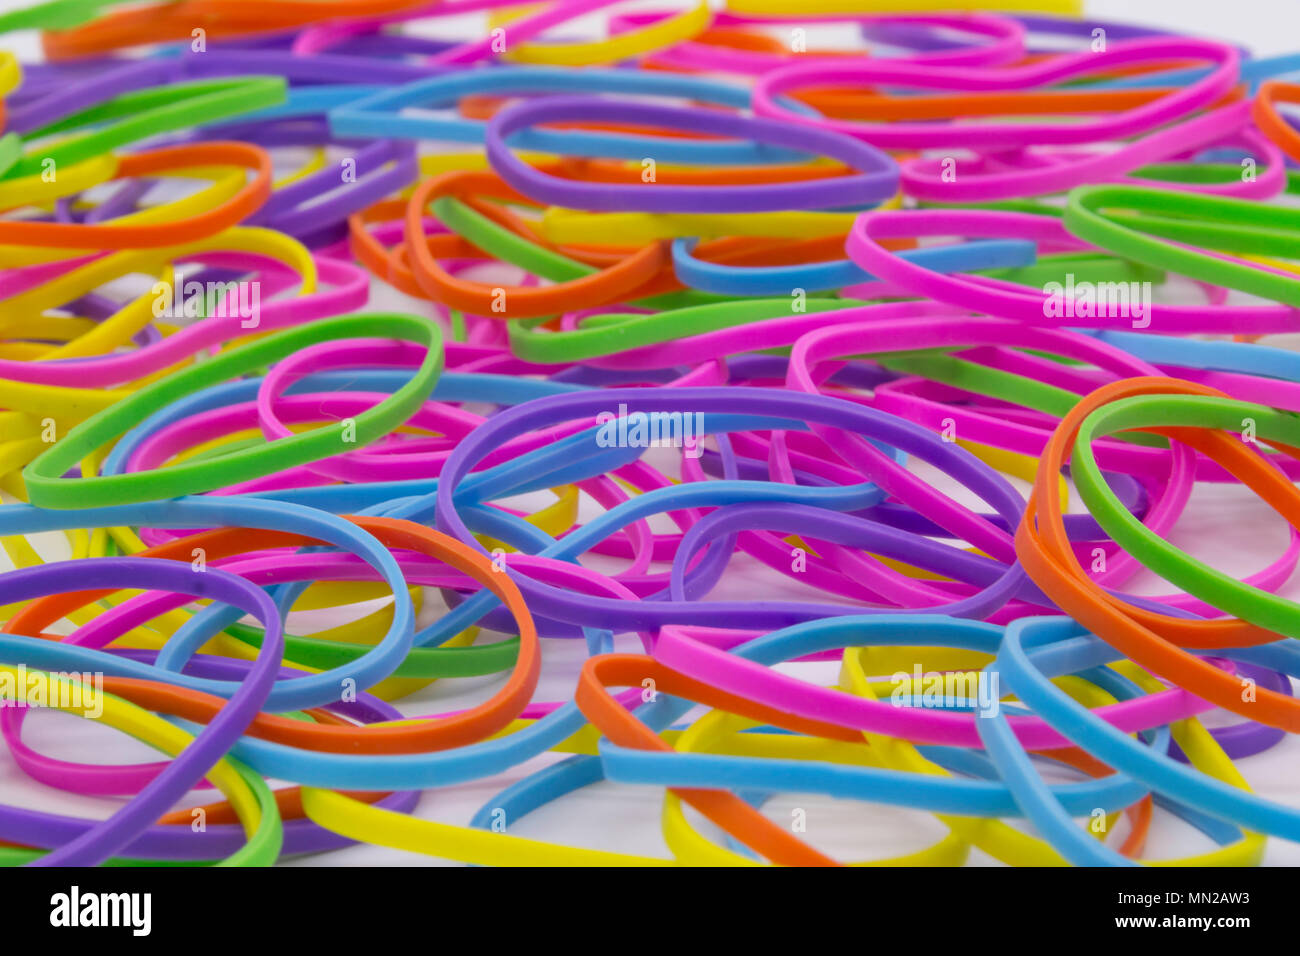 Neon Colored Elastic Rubber Bands Stock Photo - Image of heap, bands:  91227102